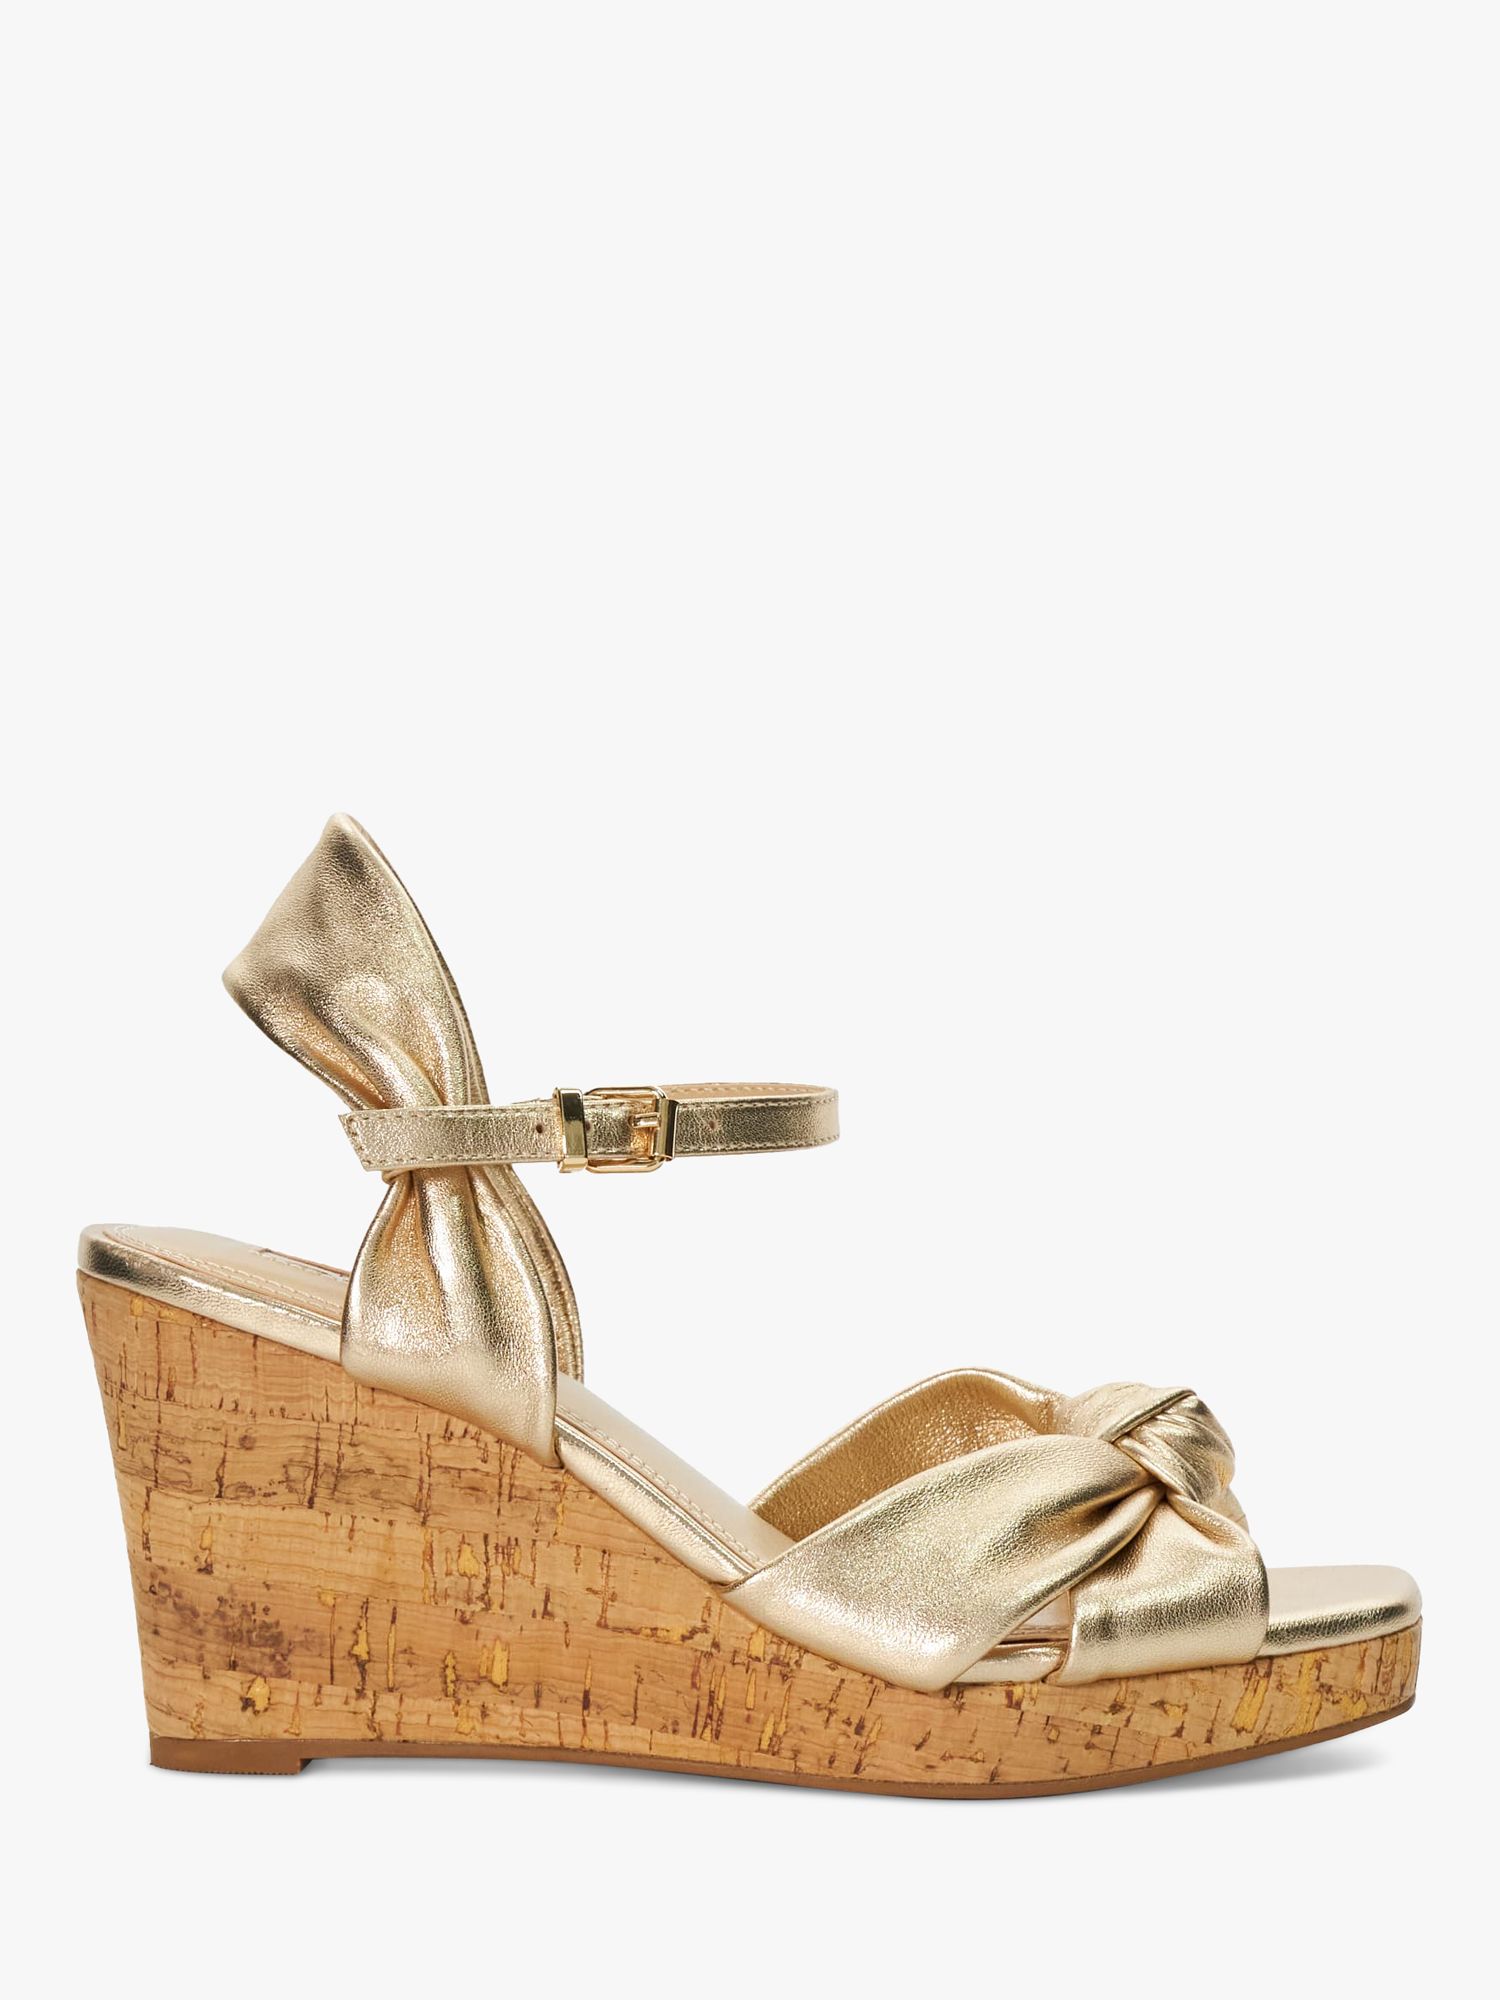 Dune Kaino Knotted Leather Wedge Sandals, Gold, 3